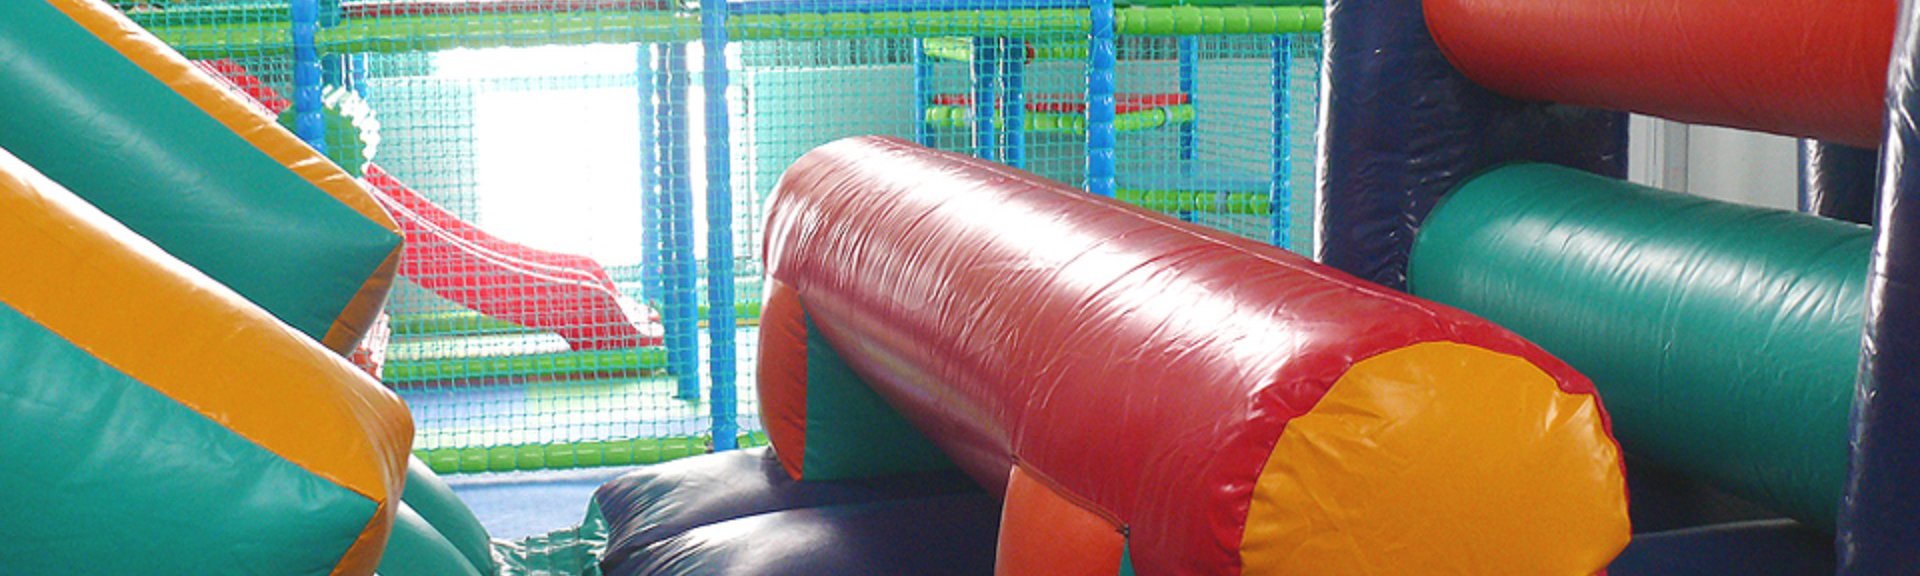 Funtastic Indoor Party and Play Venue | Cape town | Things to do With Kids